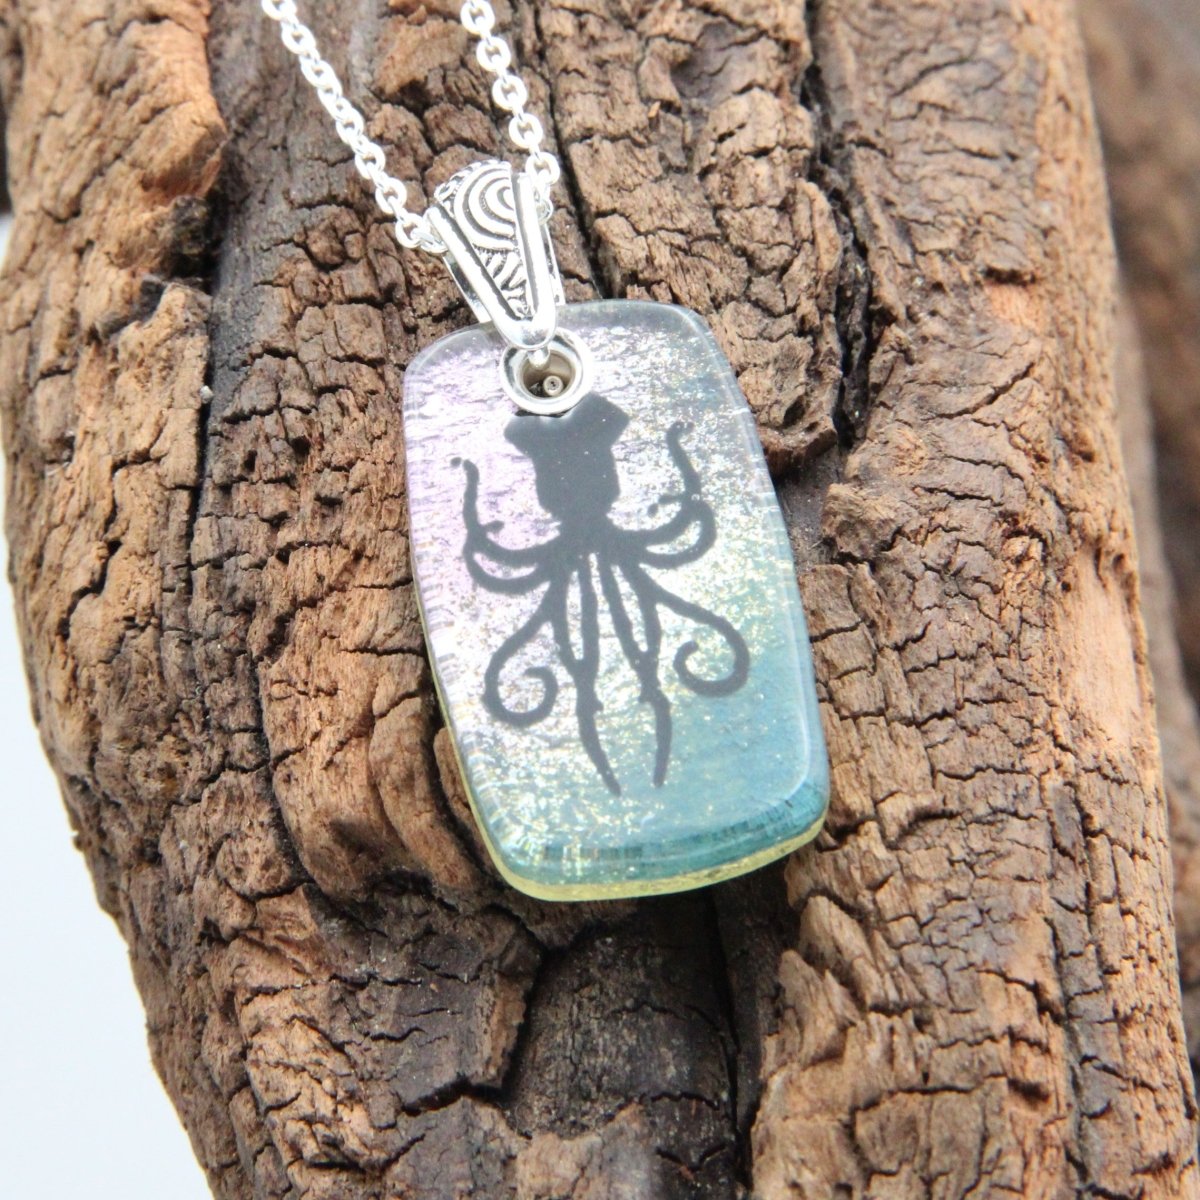 Turquoise and Purple Squid or Kraken Glass Pendant on a Silver Chain